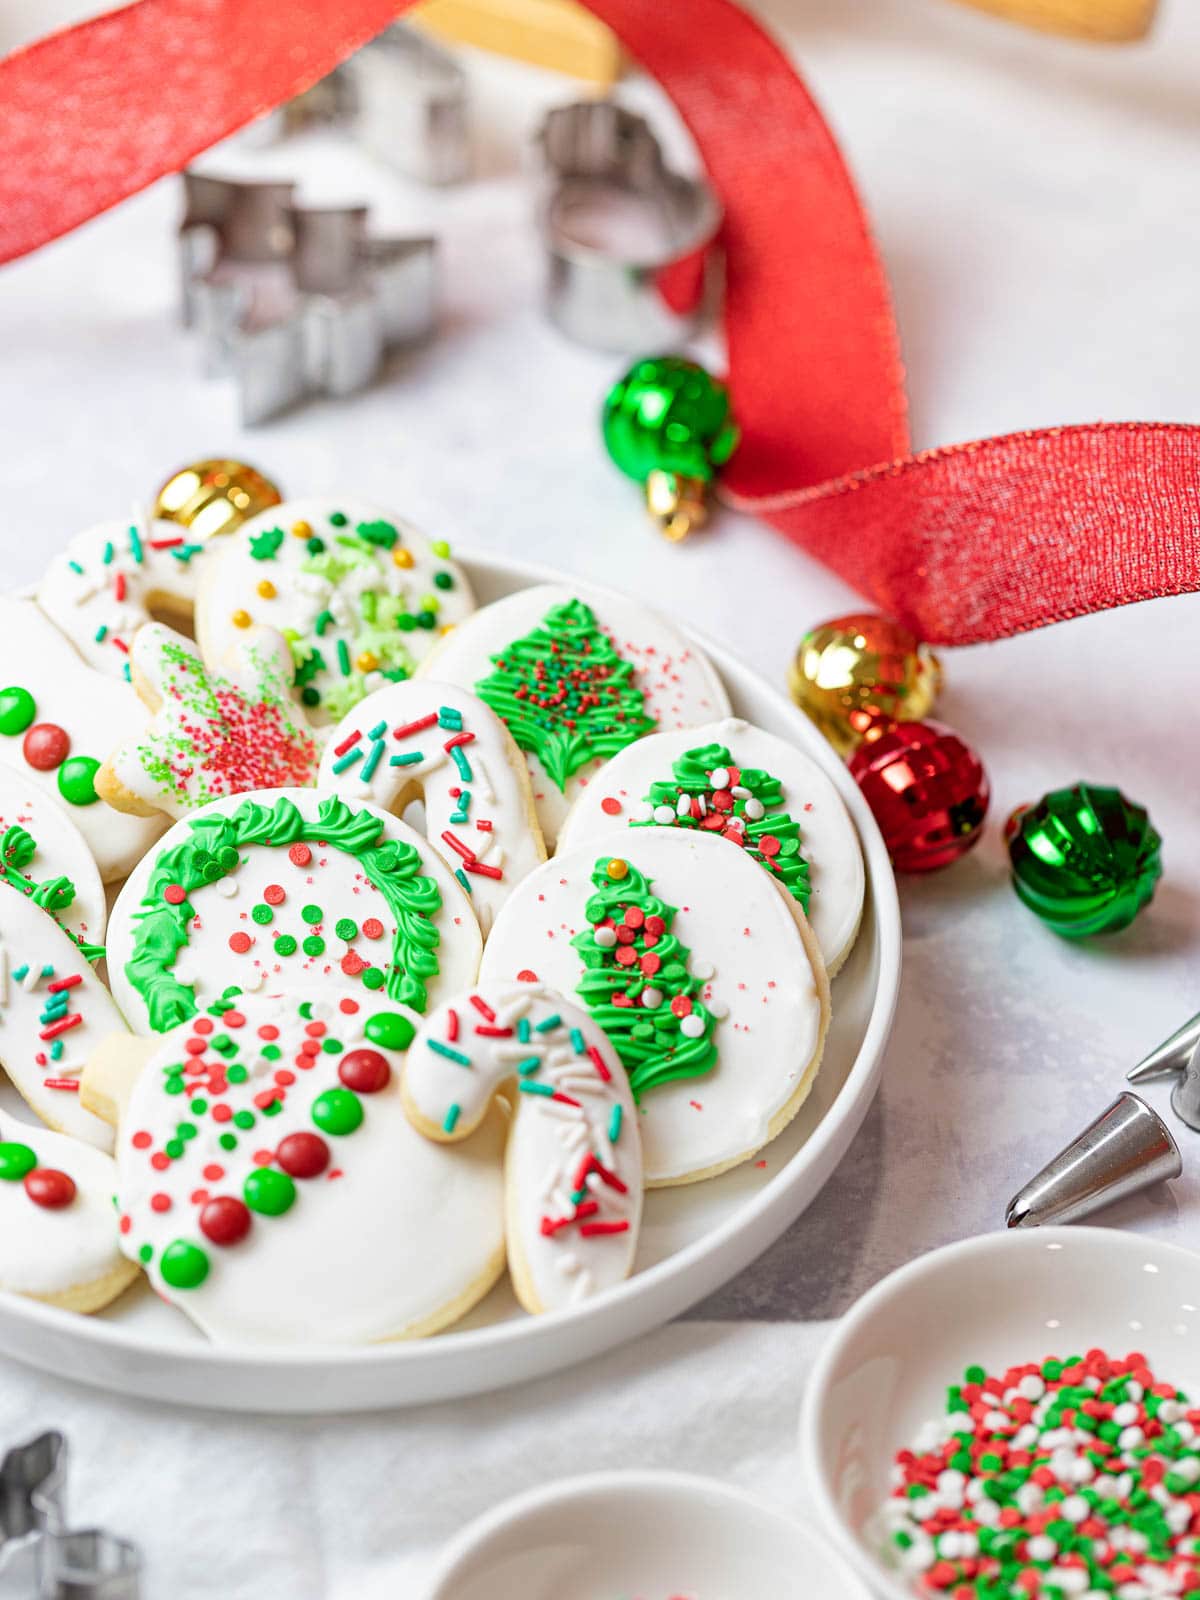 easy decorated Christmas cookies with icing and sprinkles next to ornaments, ribbon, and cookie cutters